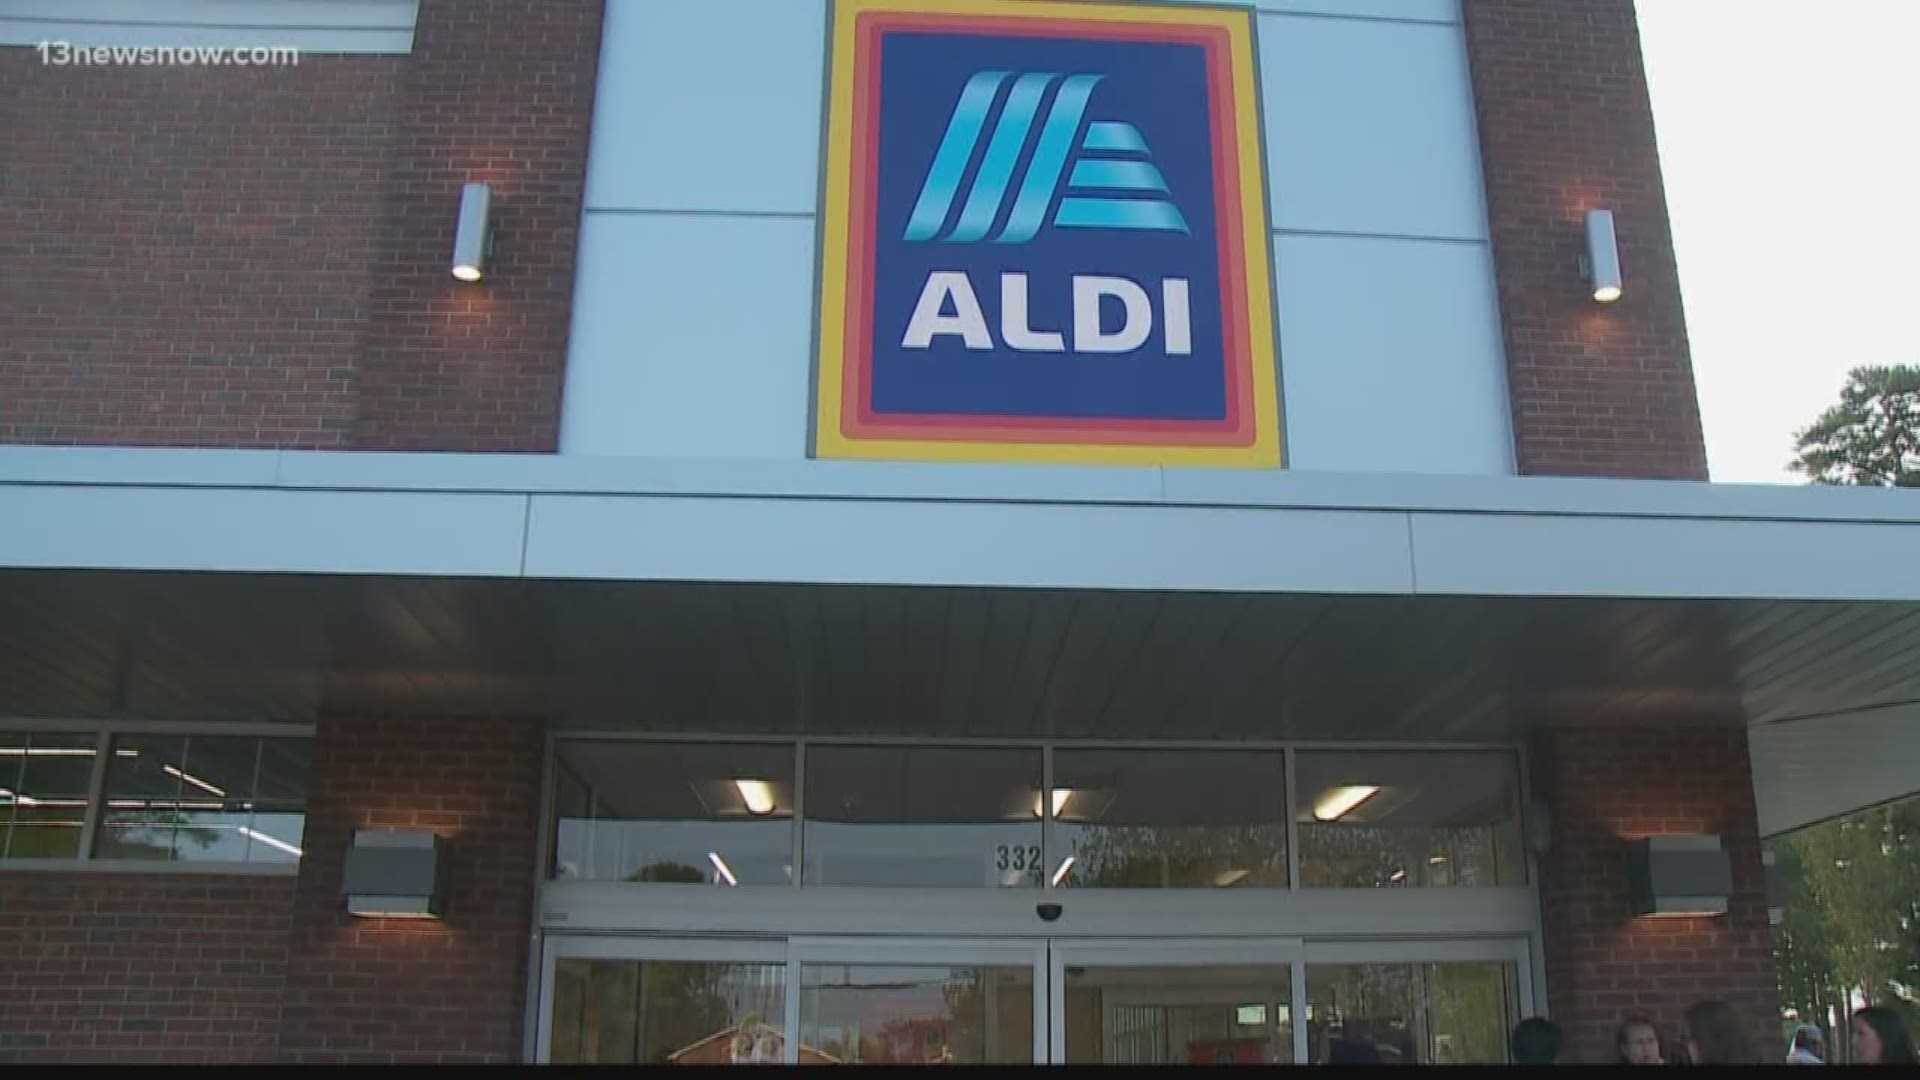 Aldi held a ribbon-cutting ceremony Thursday morning followed by its popular 'Golden Ticket' giveaway, offering gift cards to the first 100 customers.